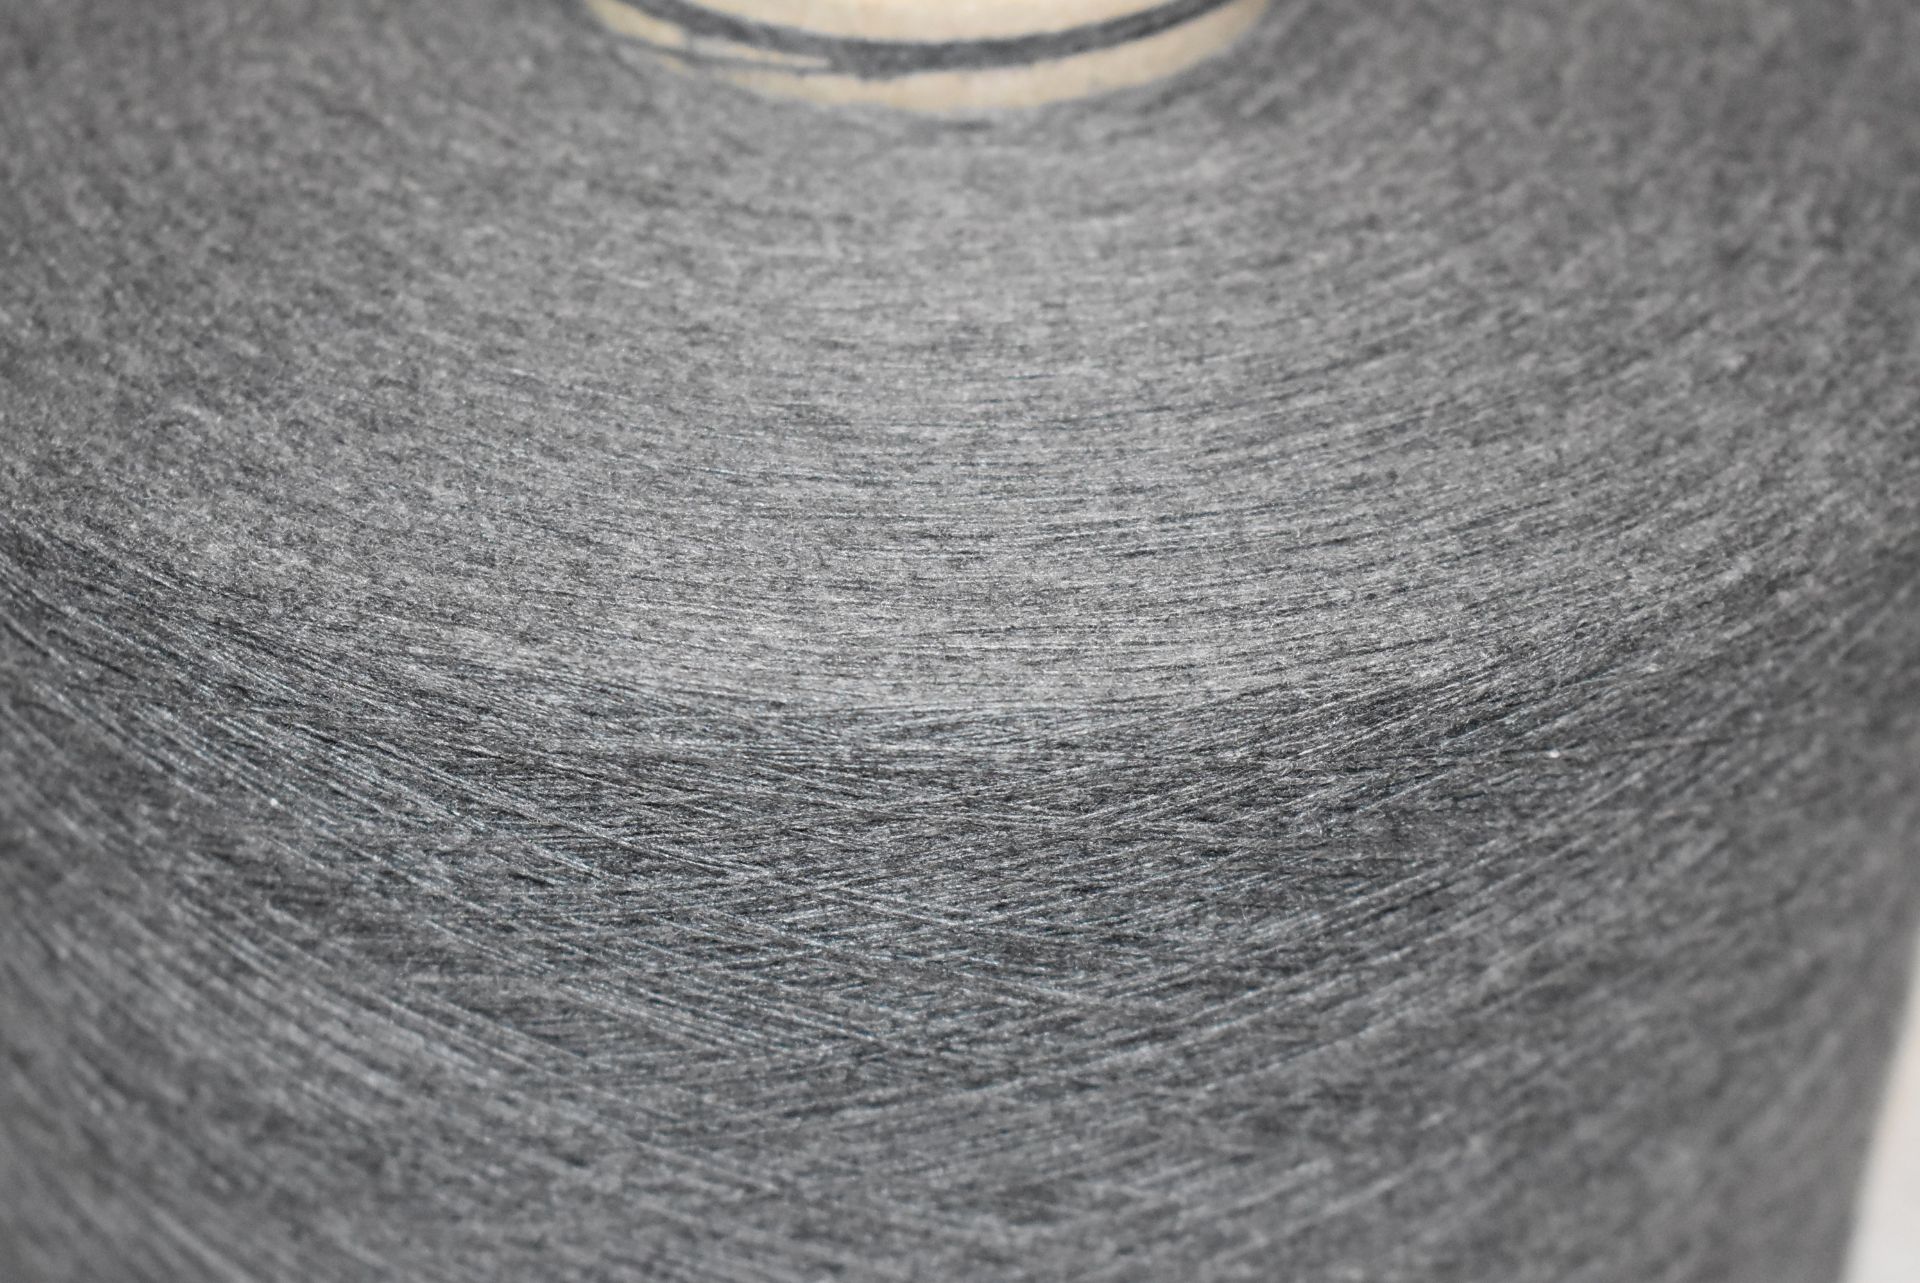 10 x Cones of 1/13 MicroCotton Knitting Yarn - Mid Grey - Approx Weight: 2,500g - New Stock ABL Yarn - Image 6 of 17